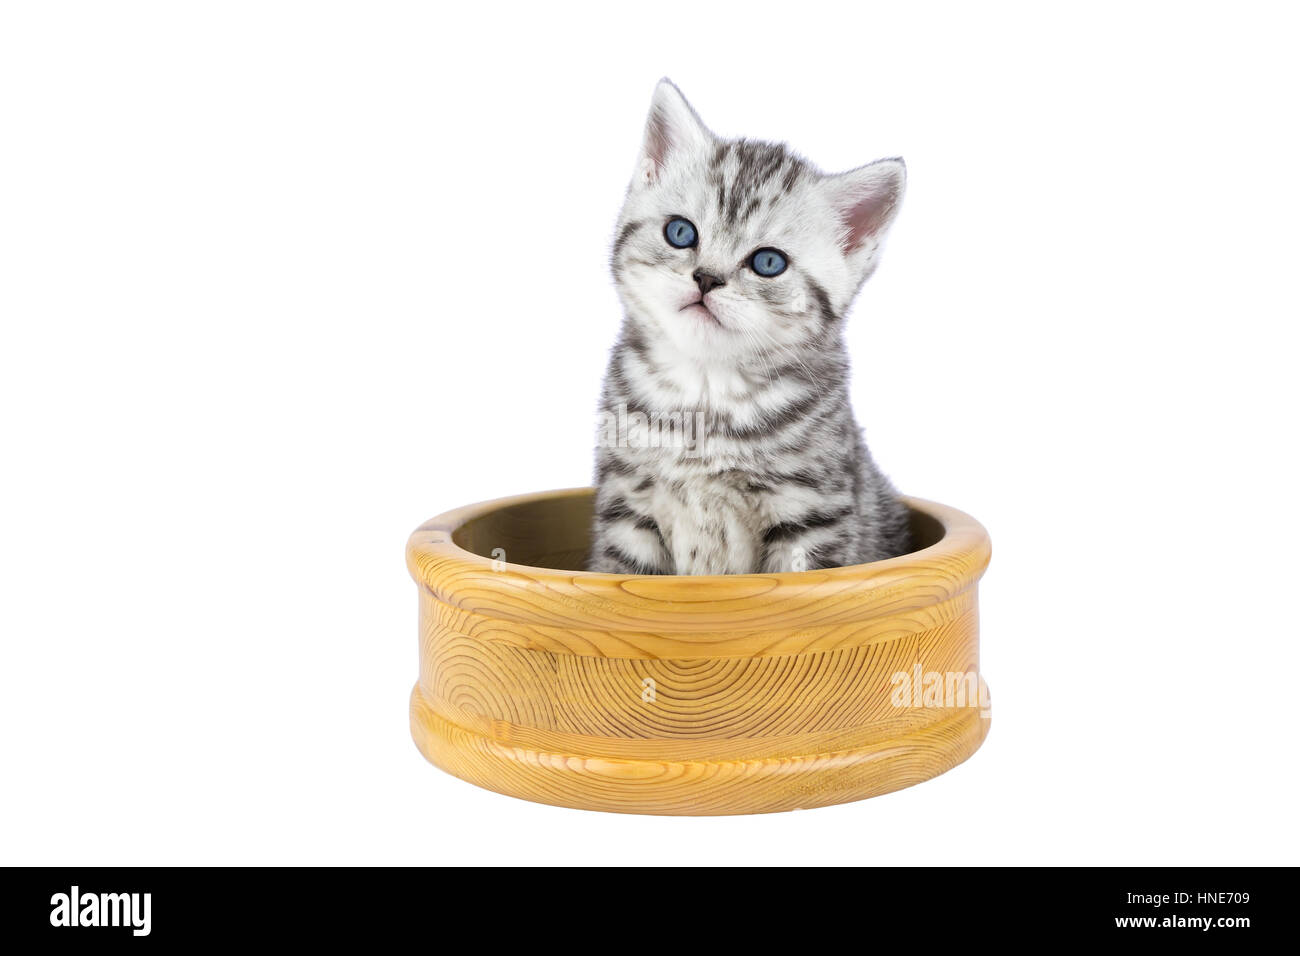 Young silver tabby cat sitting in wooden bowl isolated on white background Stock Photo